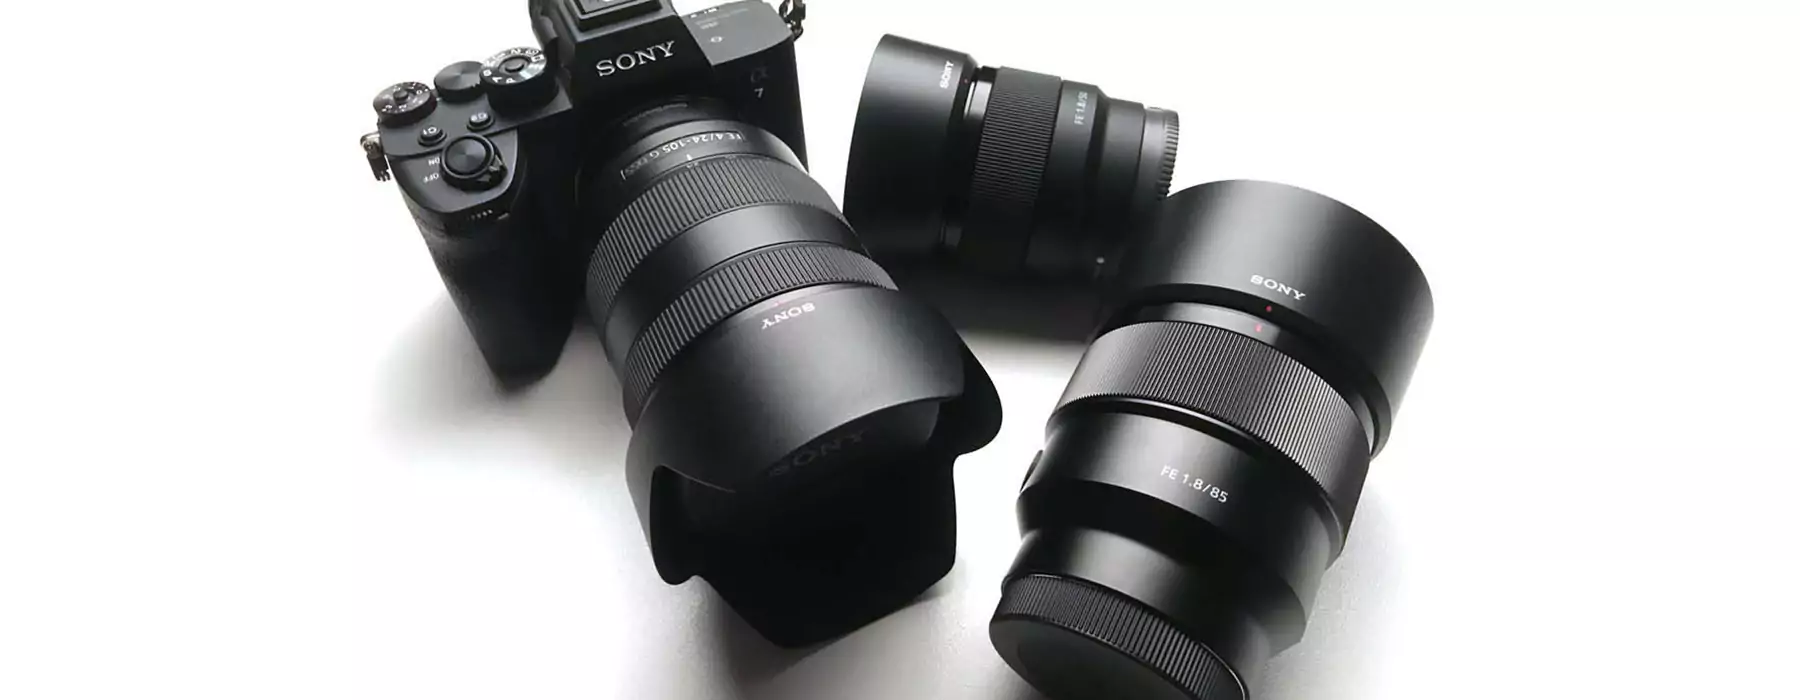 Comparison Between Your Camera and Sony Imaging Systems – Session 2